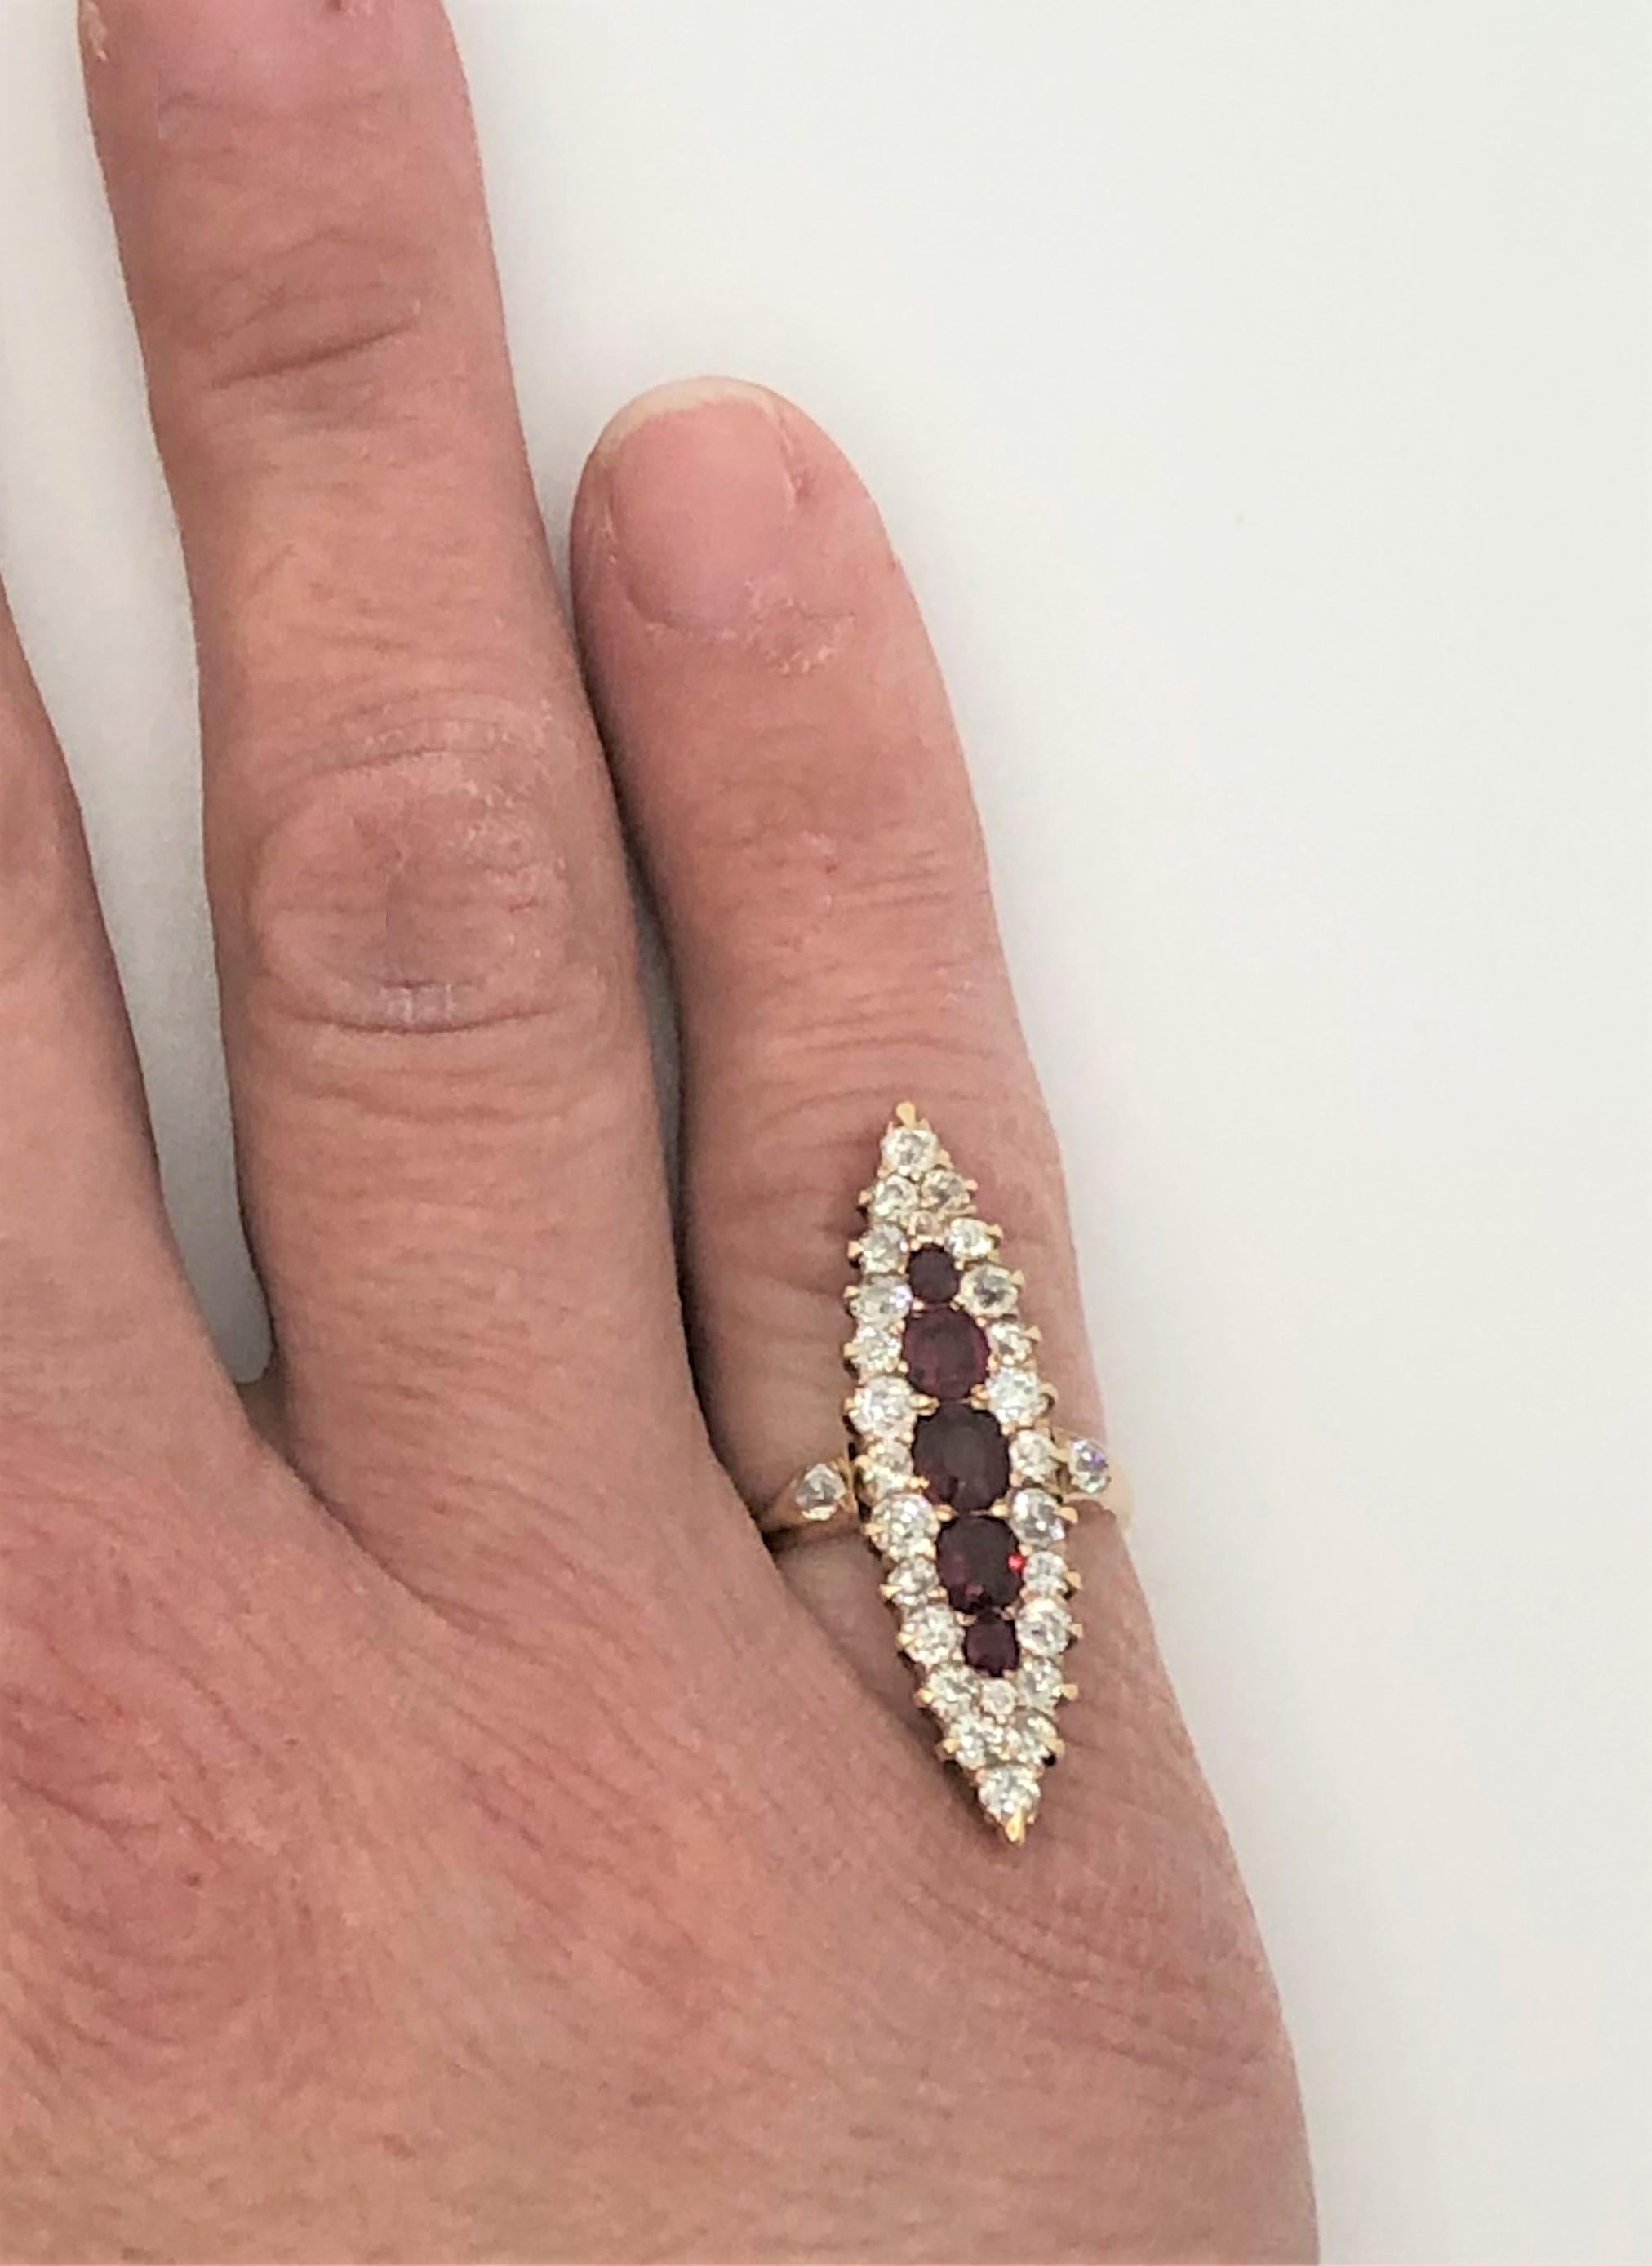 This unique ring is sure to be noticed and can be an every day statement piece.  
14 karat yellow gold vertical setting. 
5 oval rubies graduating from approximately .33ct to .05ct each
28 total round diamonds ranging from approximately .10ct to